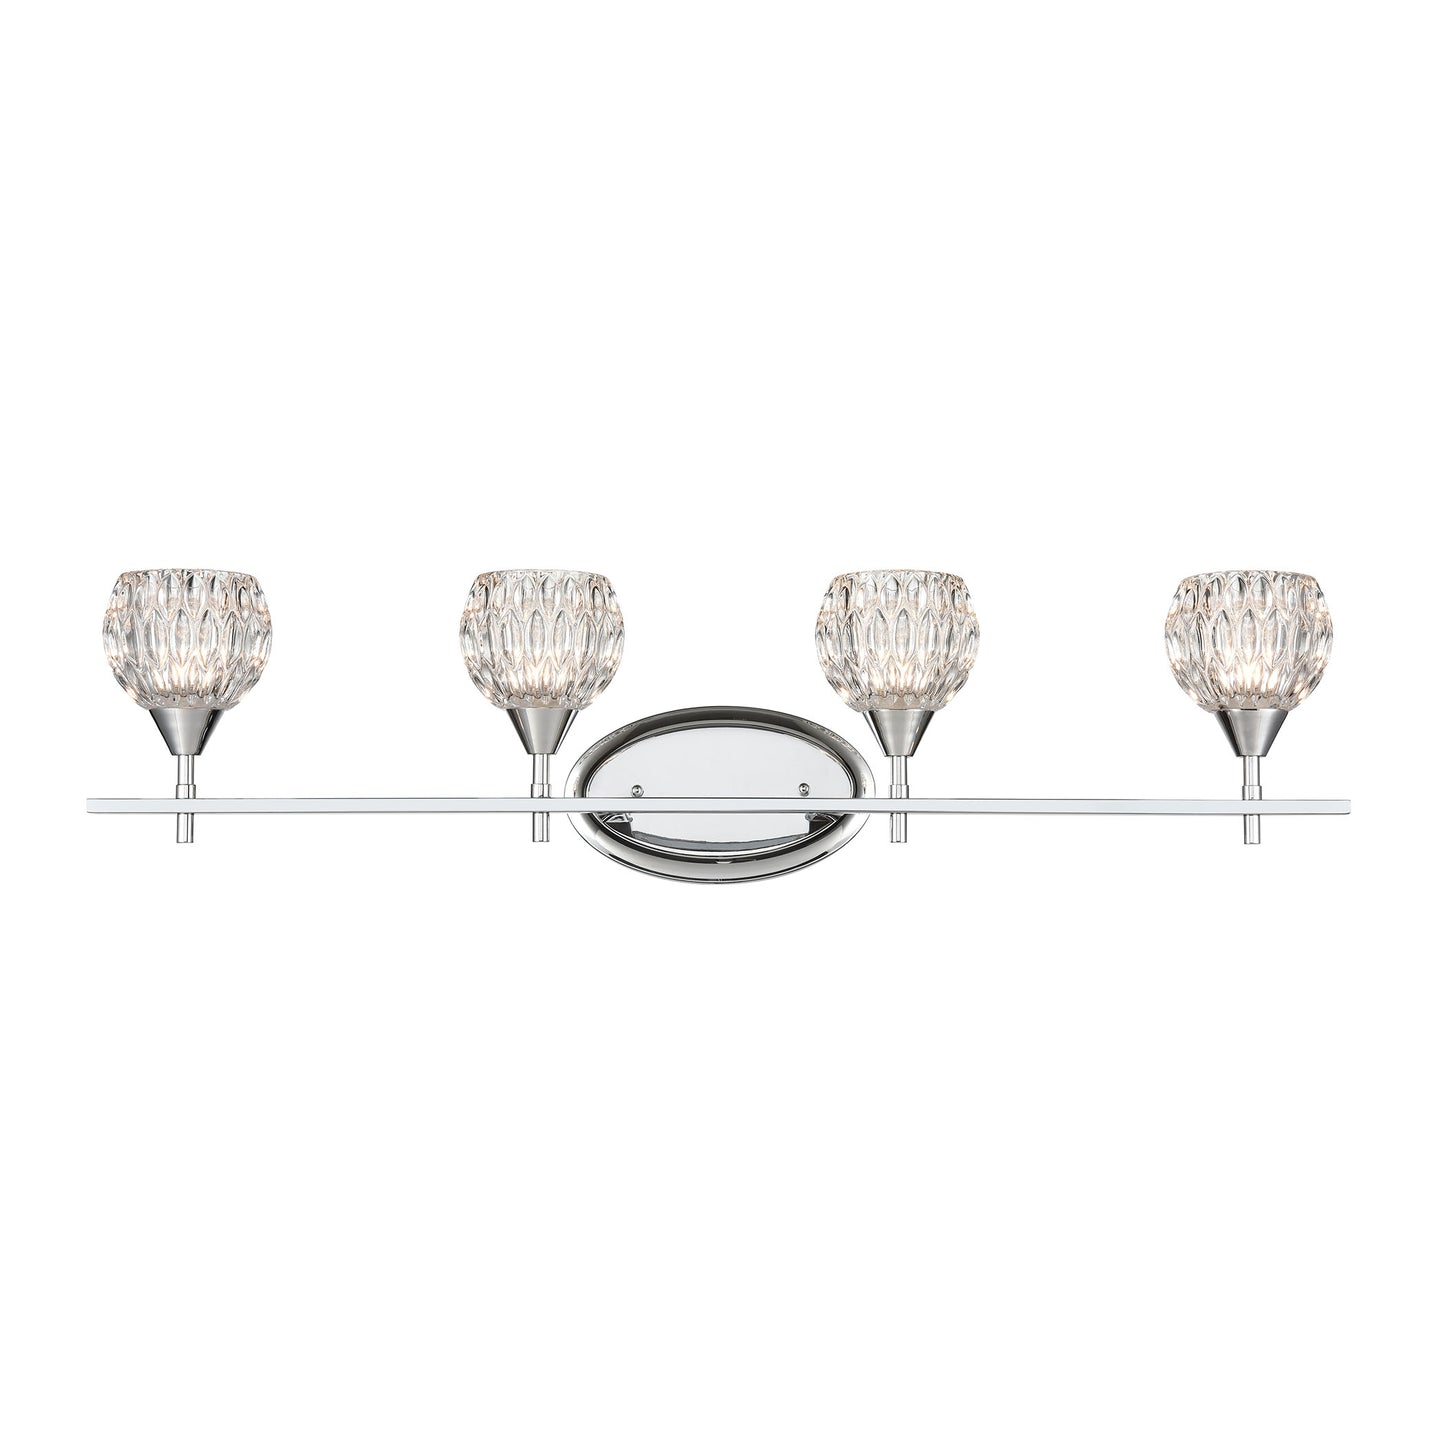 ELK Lighting 10822/4 - Kersey 34" Wide 4-Light Vanity Light in Polished Chrome with Clear Crystal